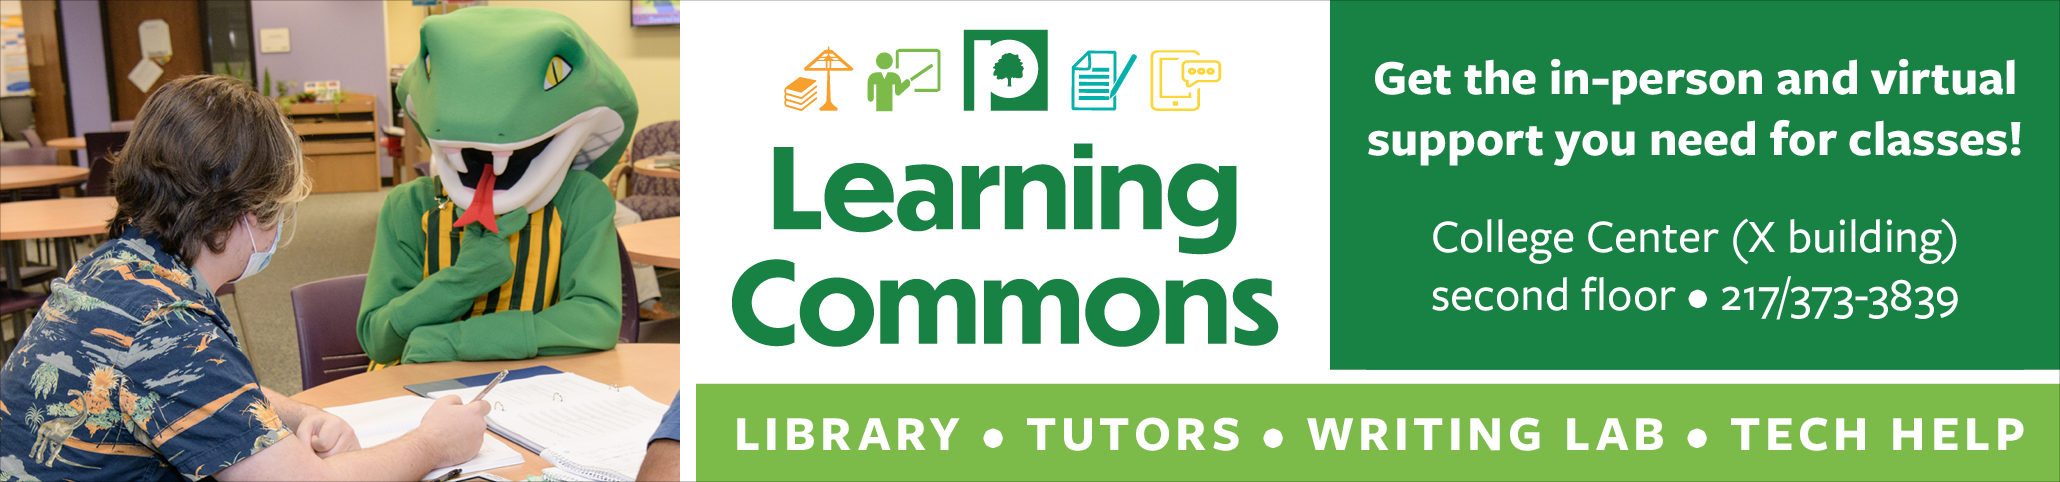 Visit the Learning Commons for library, tutoring, writing lab, and tech help